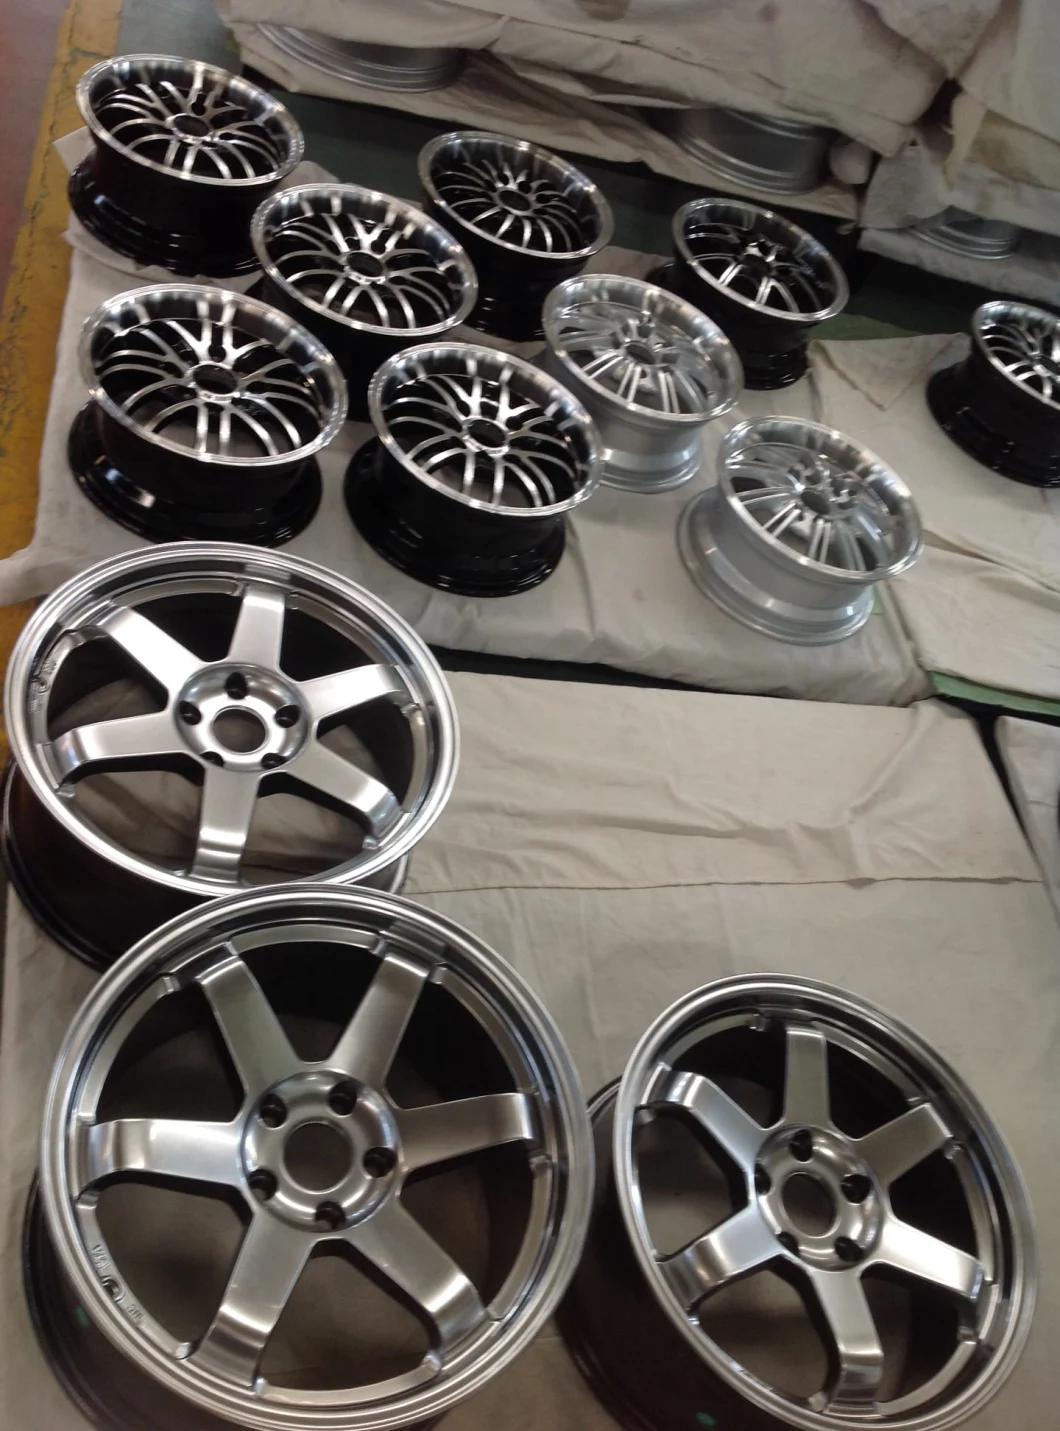 Customized 2 Piece Rims 22 Inch Forged Alloy Wheels Rim 5X112 Wheels Forged Wheel Blank for G30